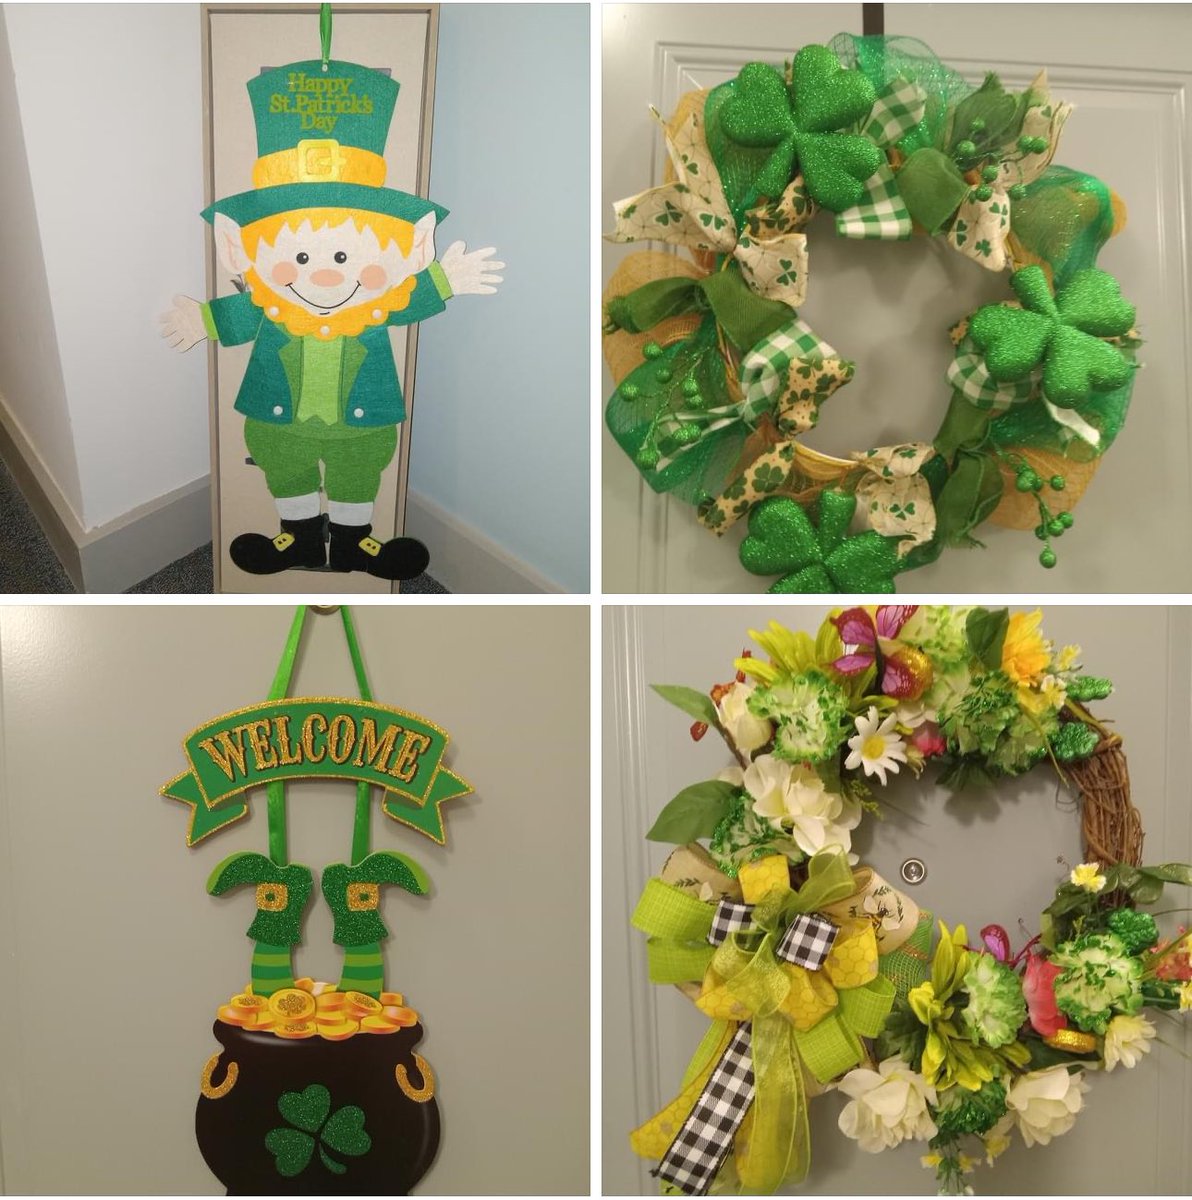 Front door decorations always bring a smile when your walking by.  Happy St. Patrick's Day everyone! 🍀

#stpatricksdaydecor #welcomefeeling #Neighborly #sovanastuart #55plusapartmenthomes #wonderfulresidents #alwaysunited